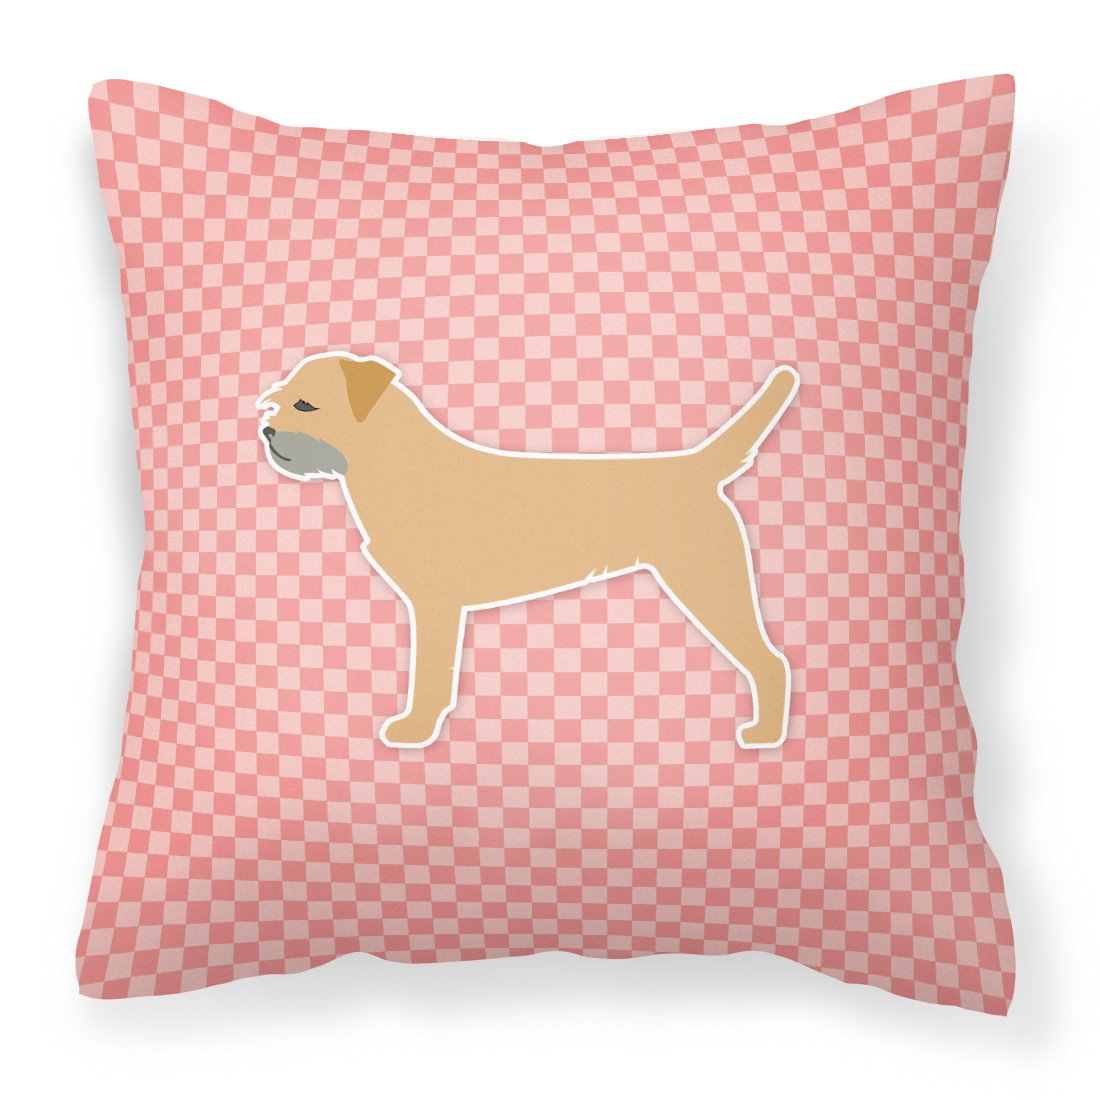 Border Terrier Checkerboard Pink Fabric Decorative Pillow BB3589PW1818 by Caroline's Treasures